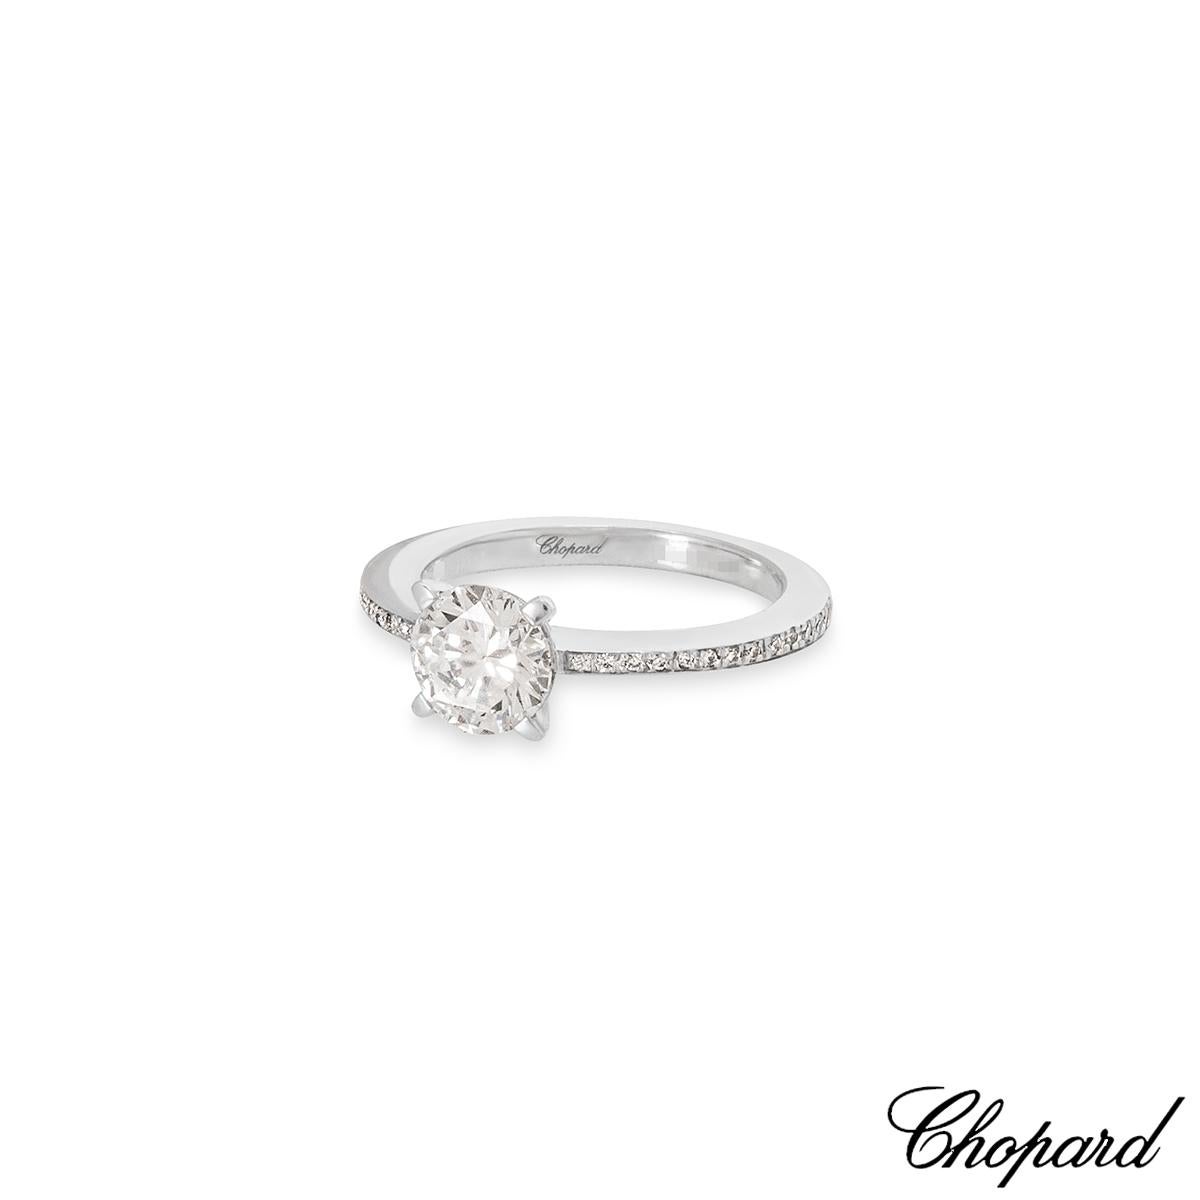 chopard engagement rings